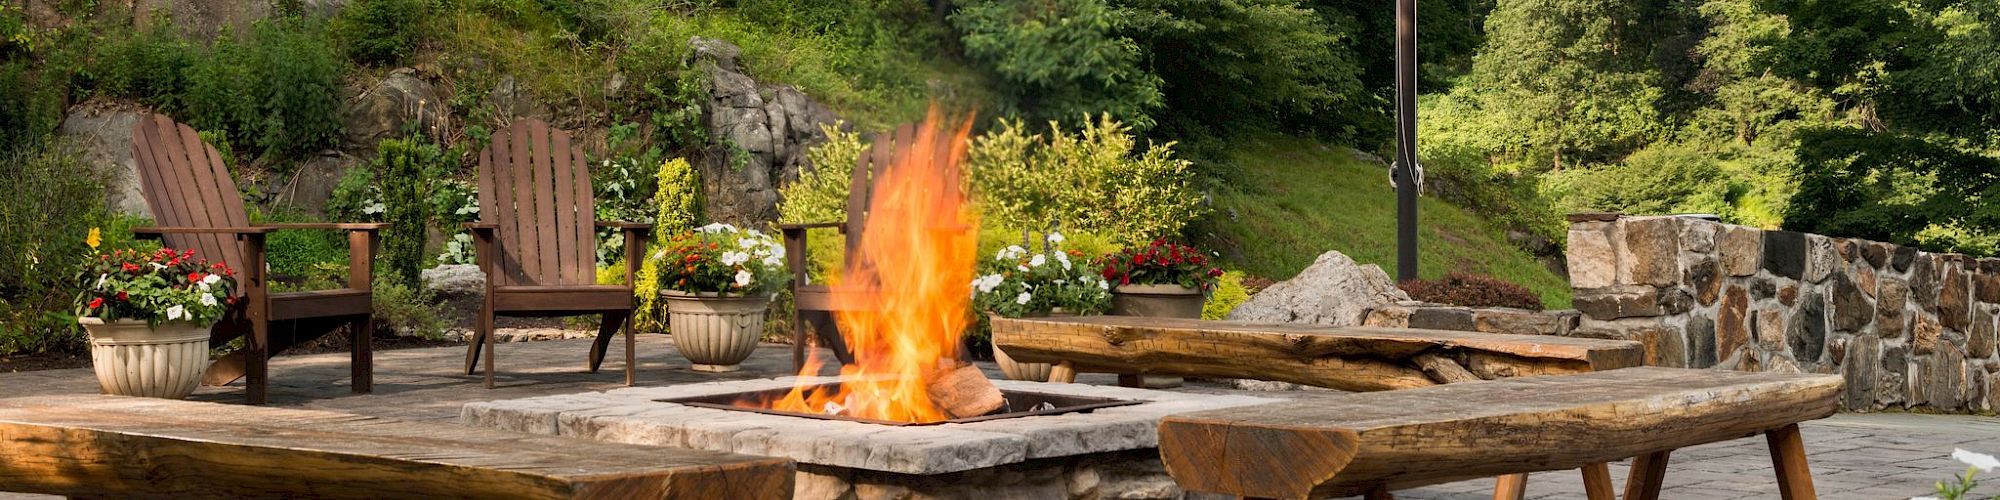 An outdoor fire pit is lit, surrounded by wooden Adirondack chairs, flagpole to the side, all set against a verdant backdrop.